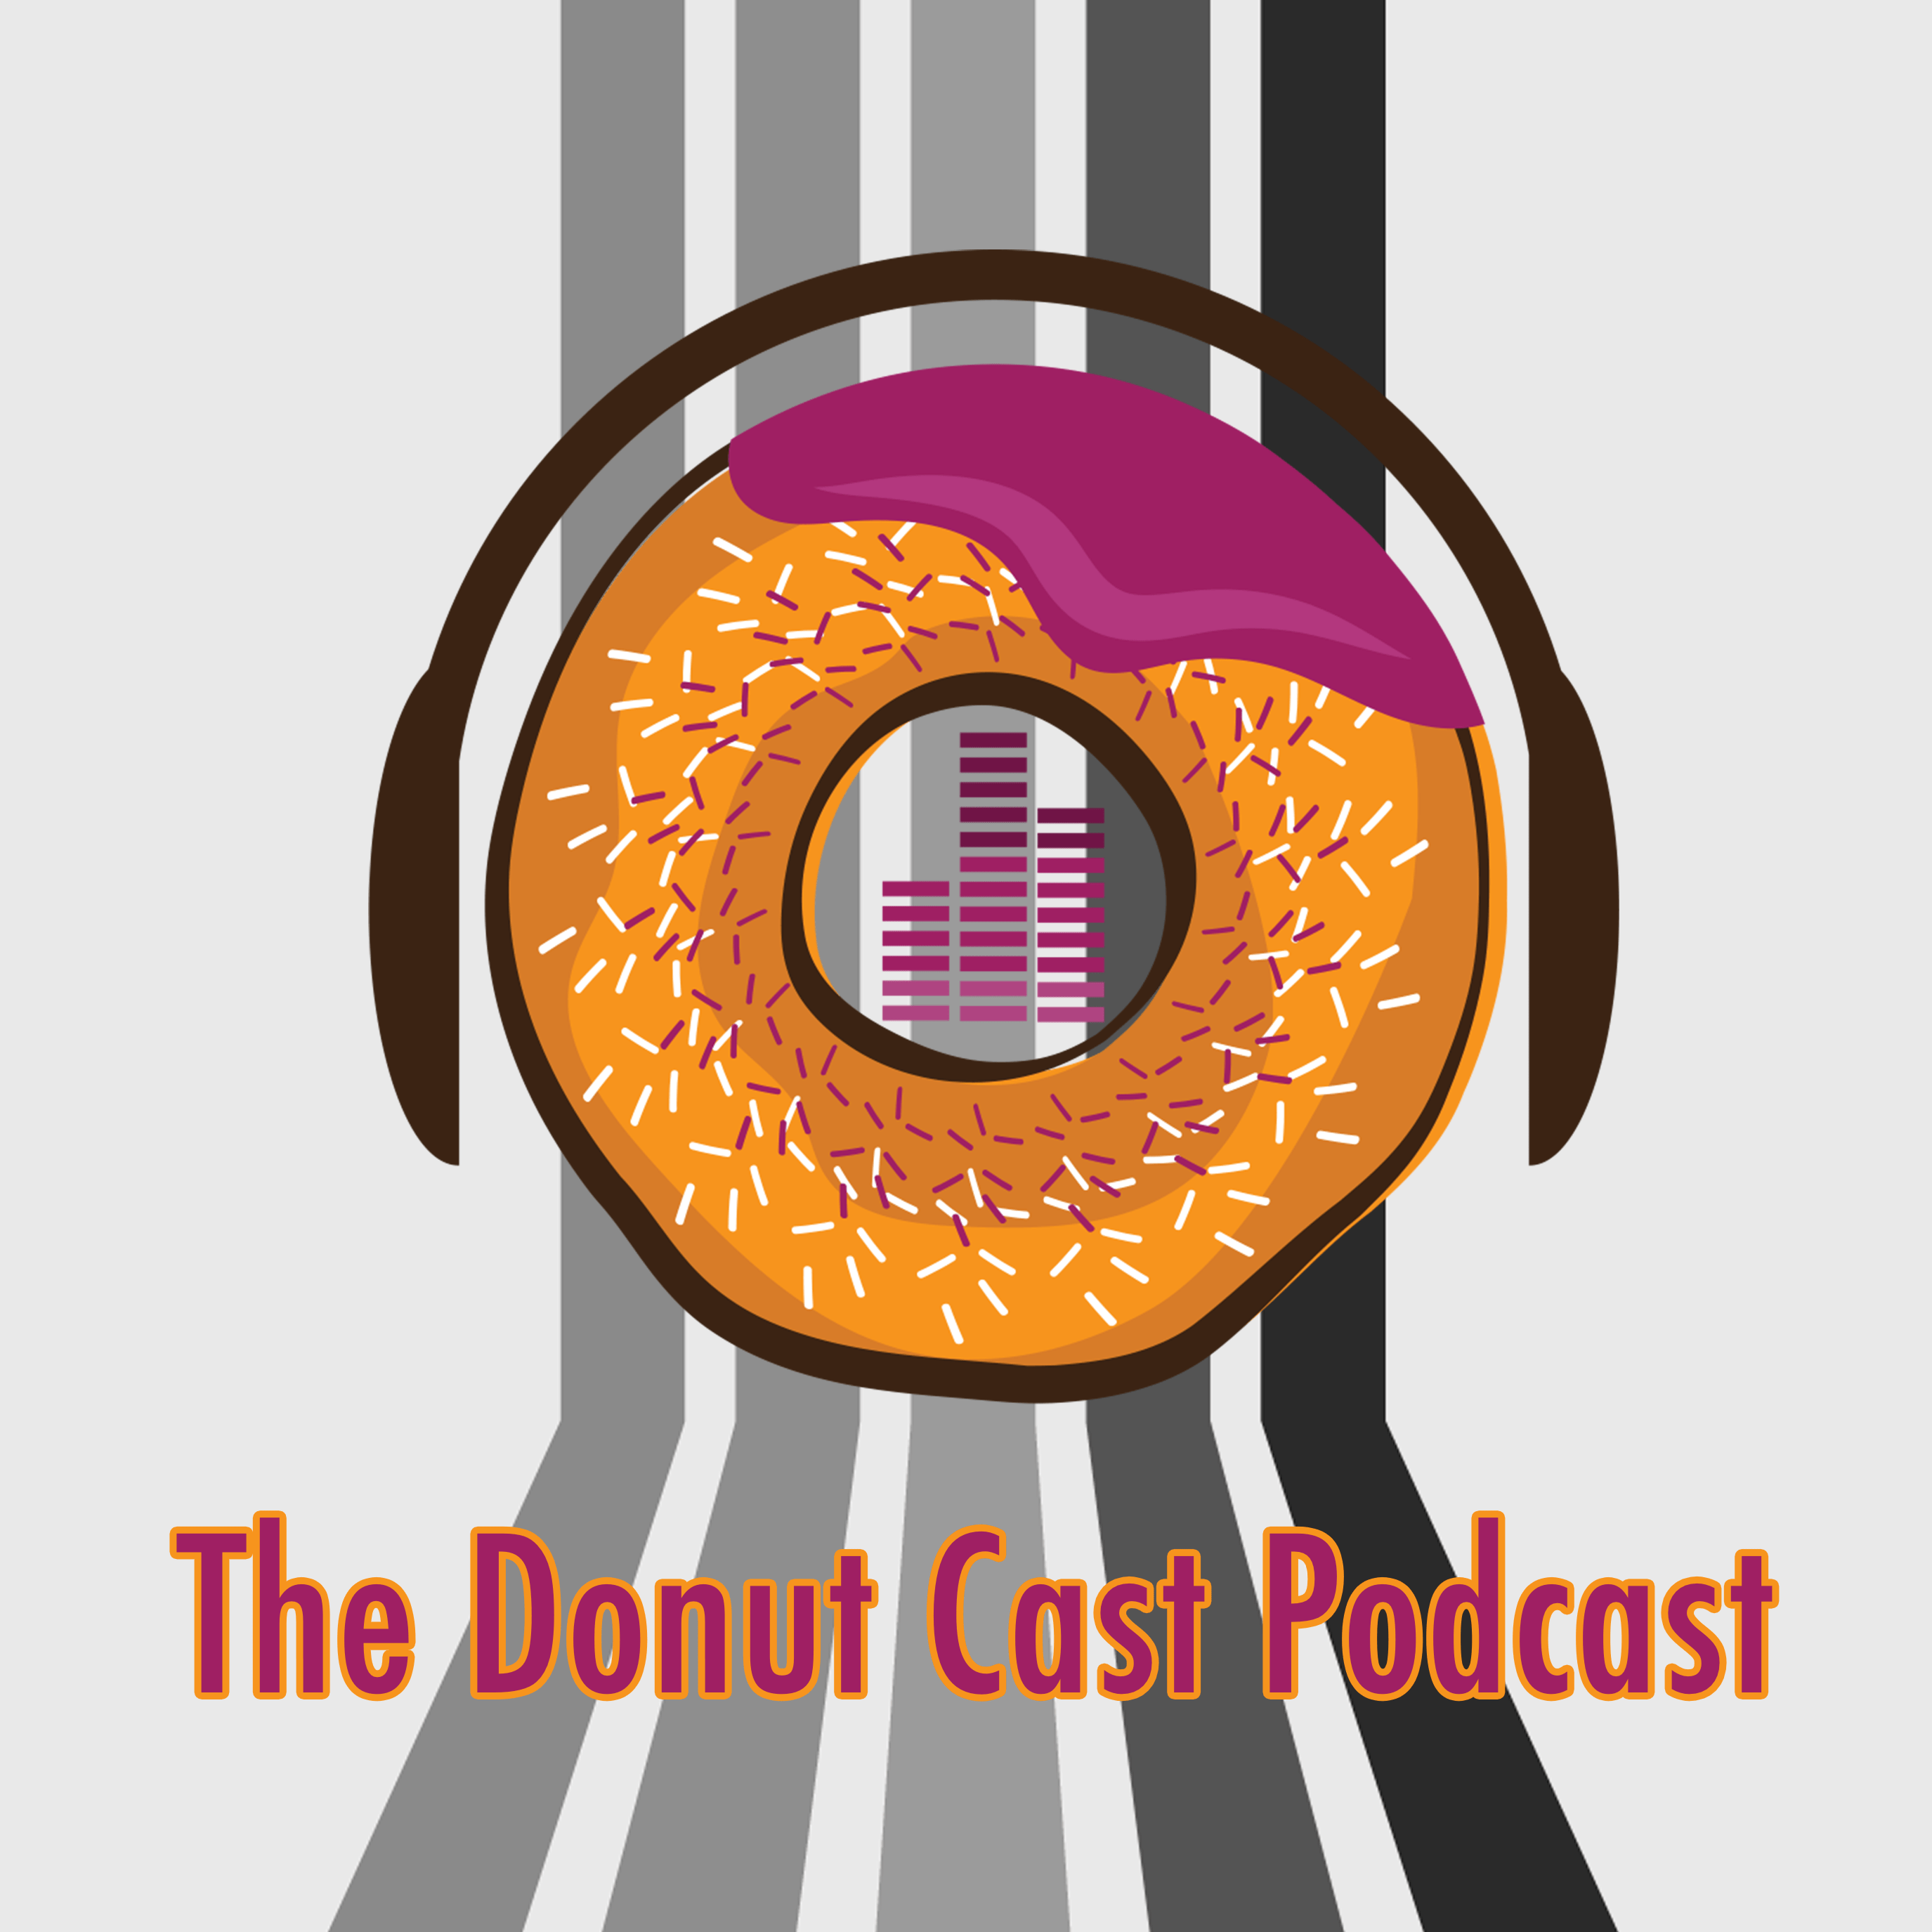 The Donut Cast Podcast